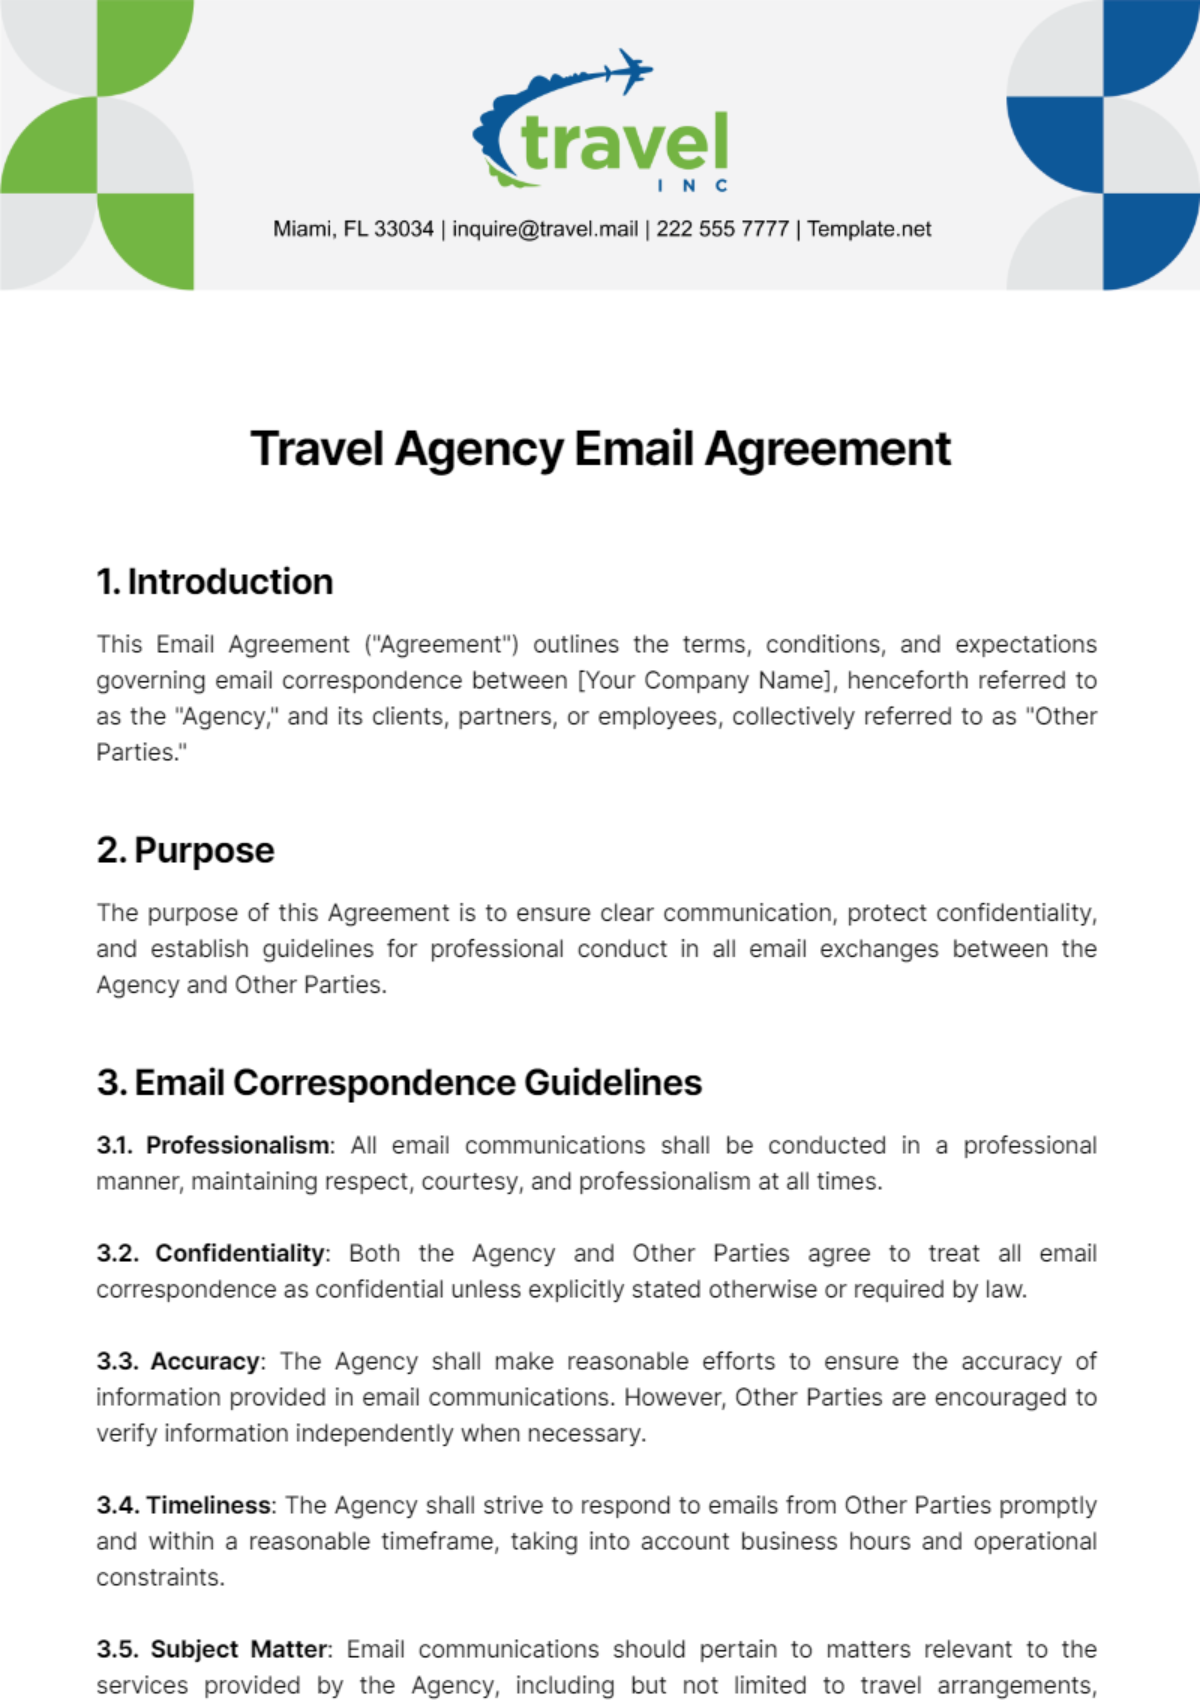 Free Travel Agency Email Agreement Template